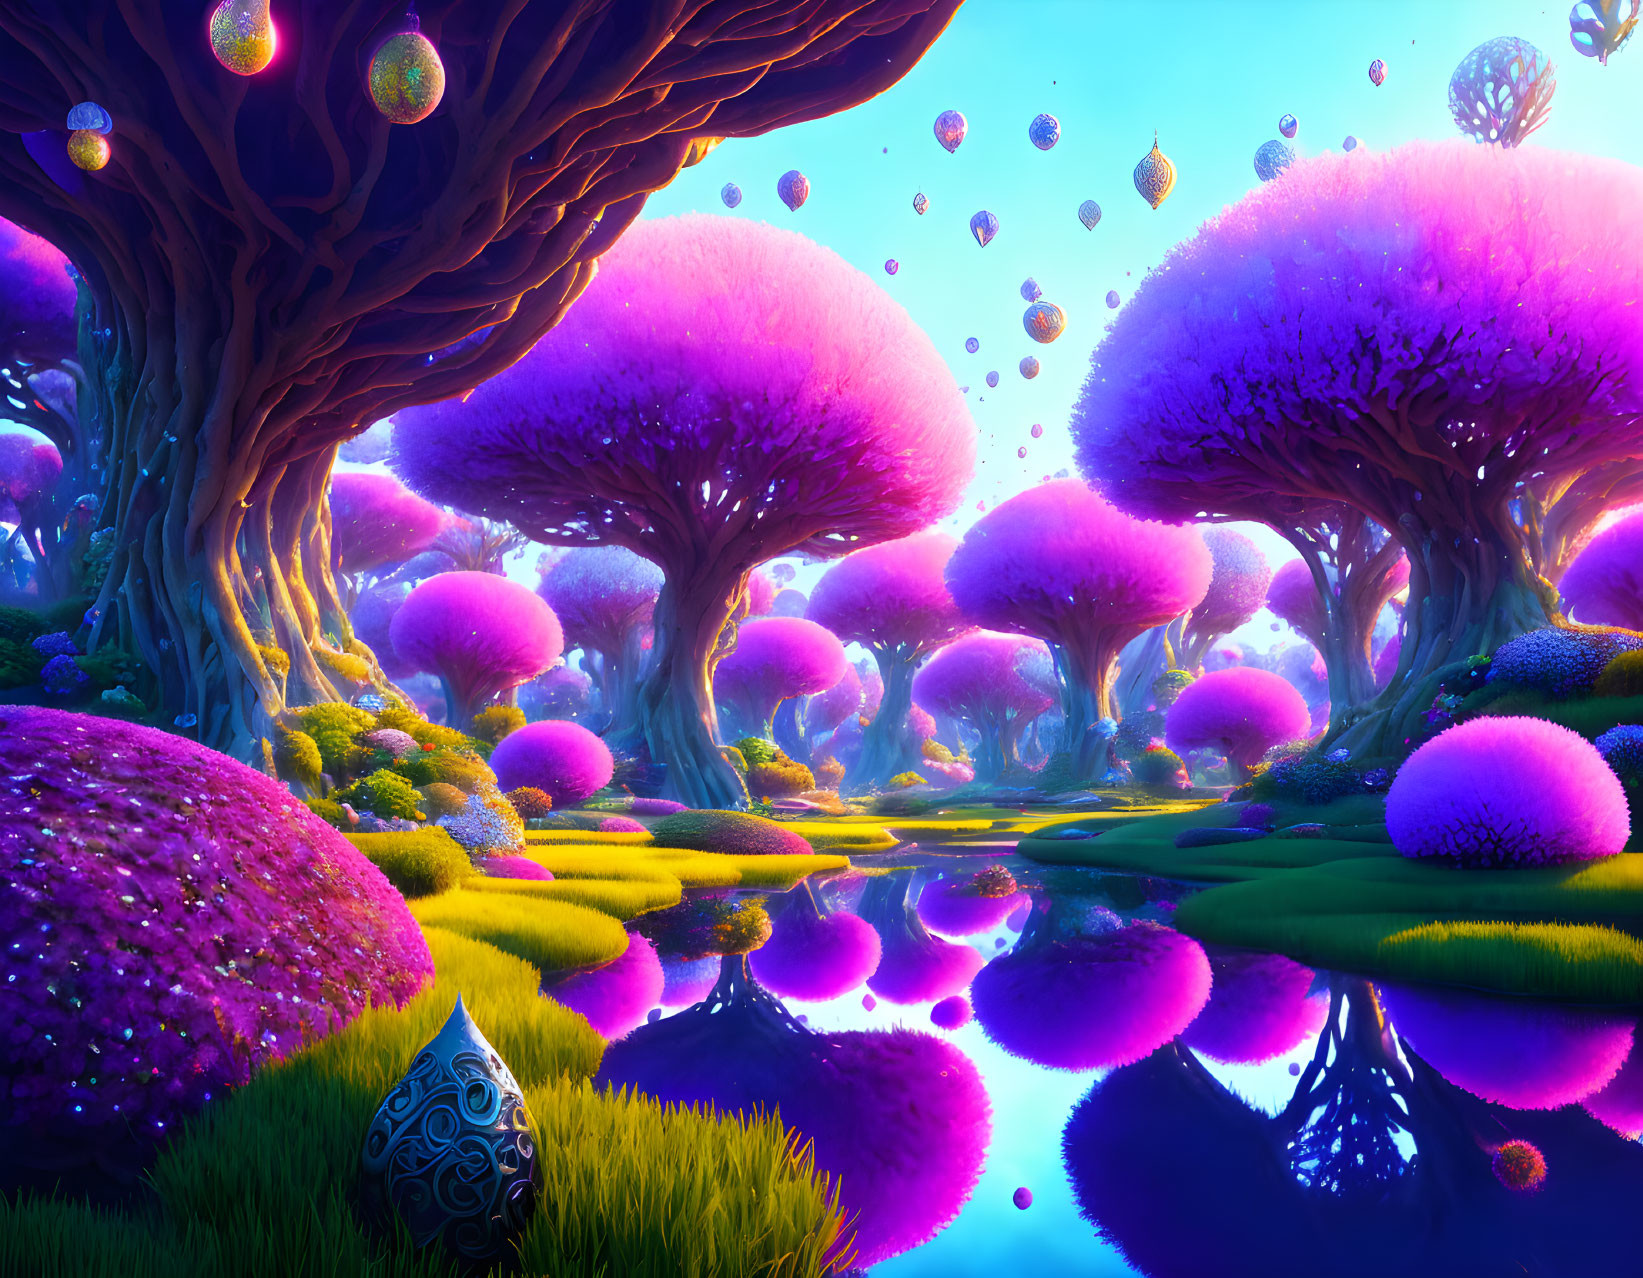 Fantastical landscape with purple and pink foliage and floating orbs.